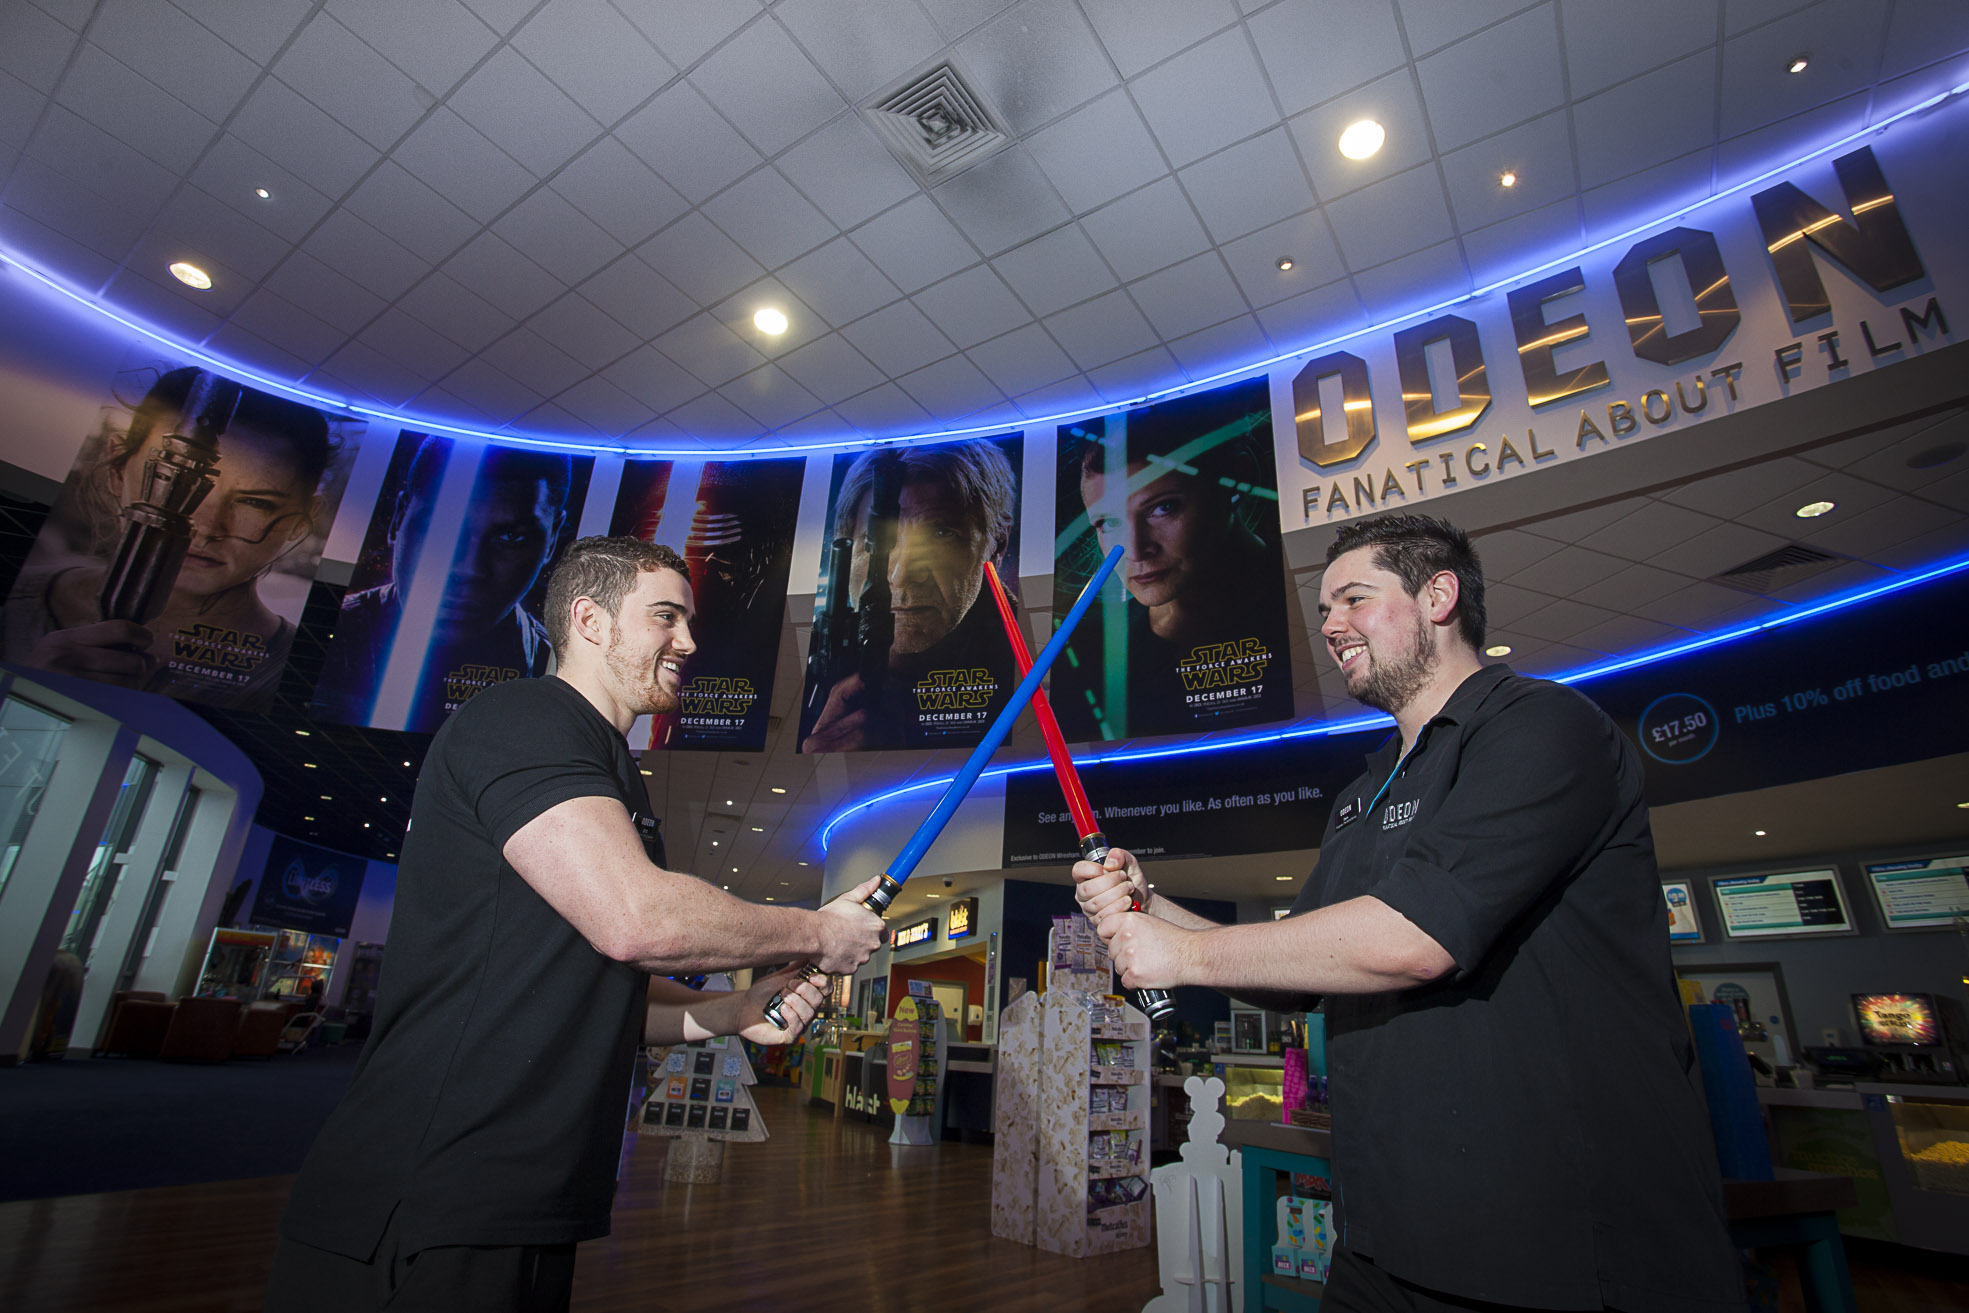 Record tickets sales for Star Wars blockbuster are out of this world